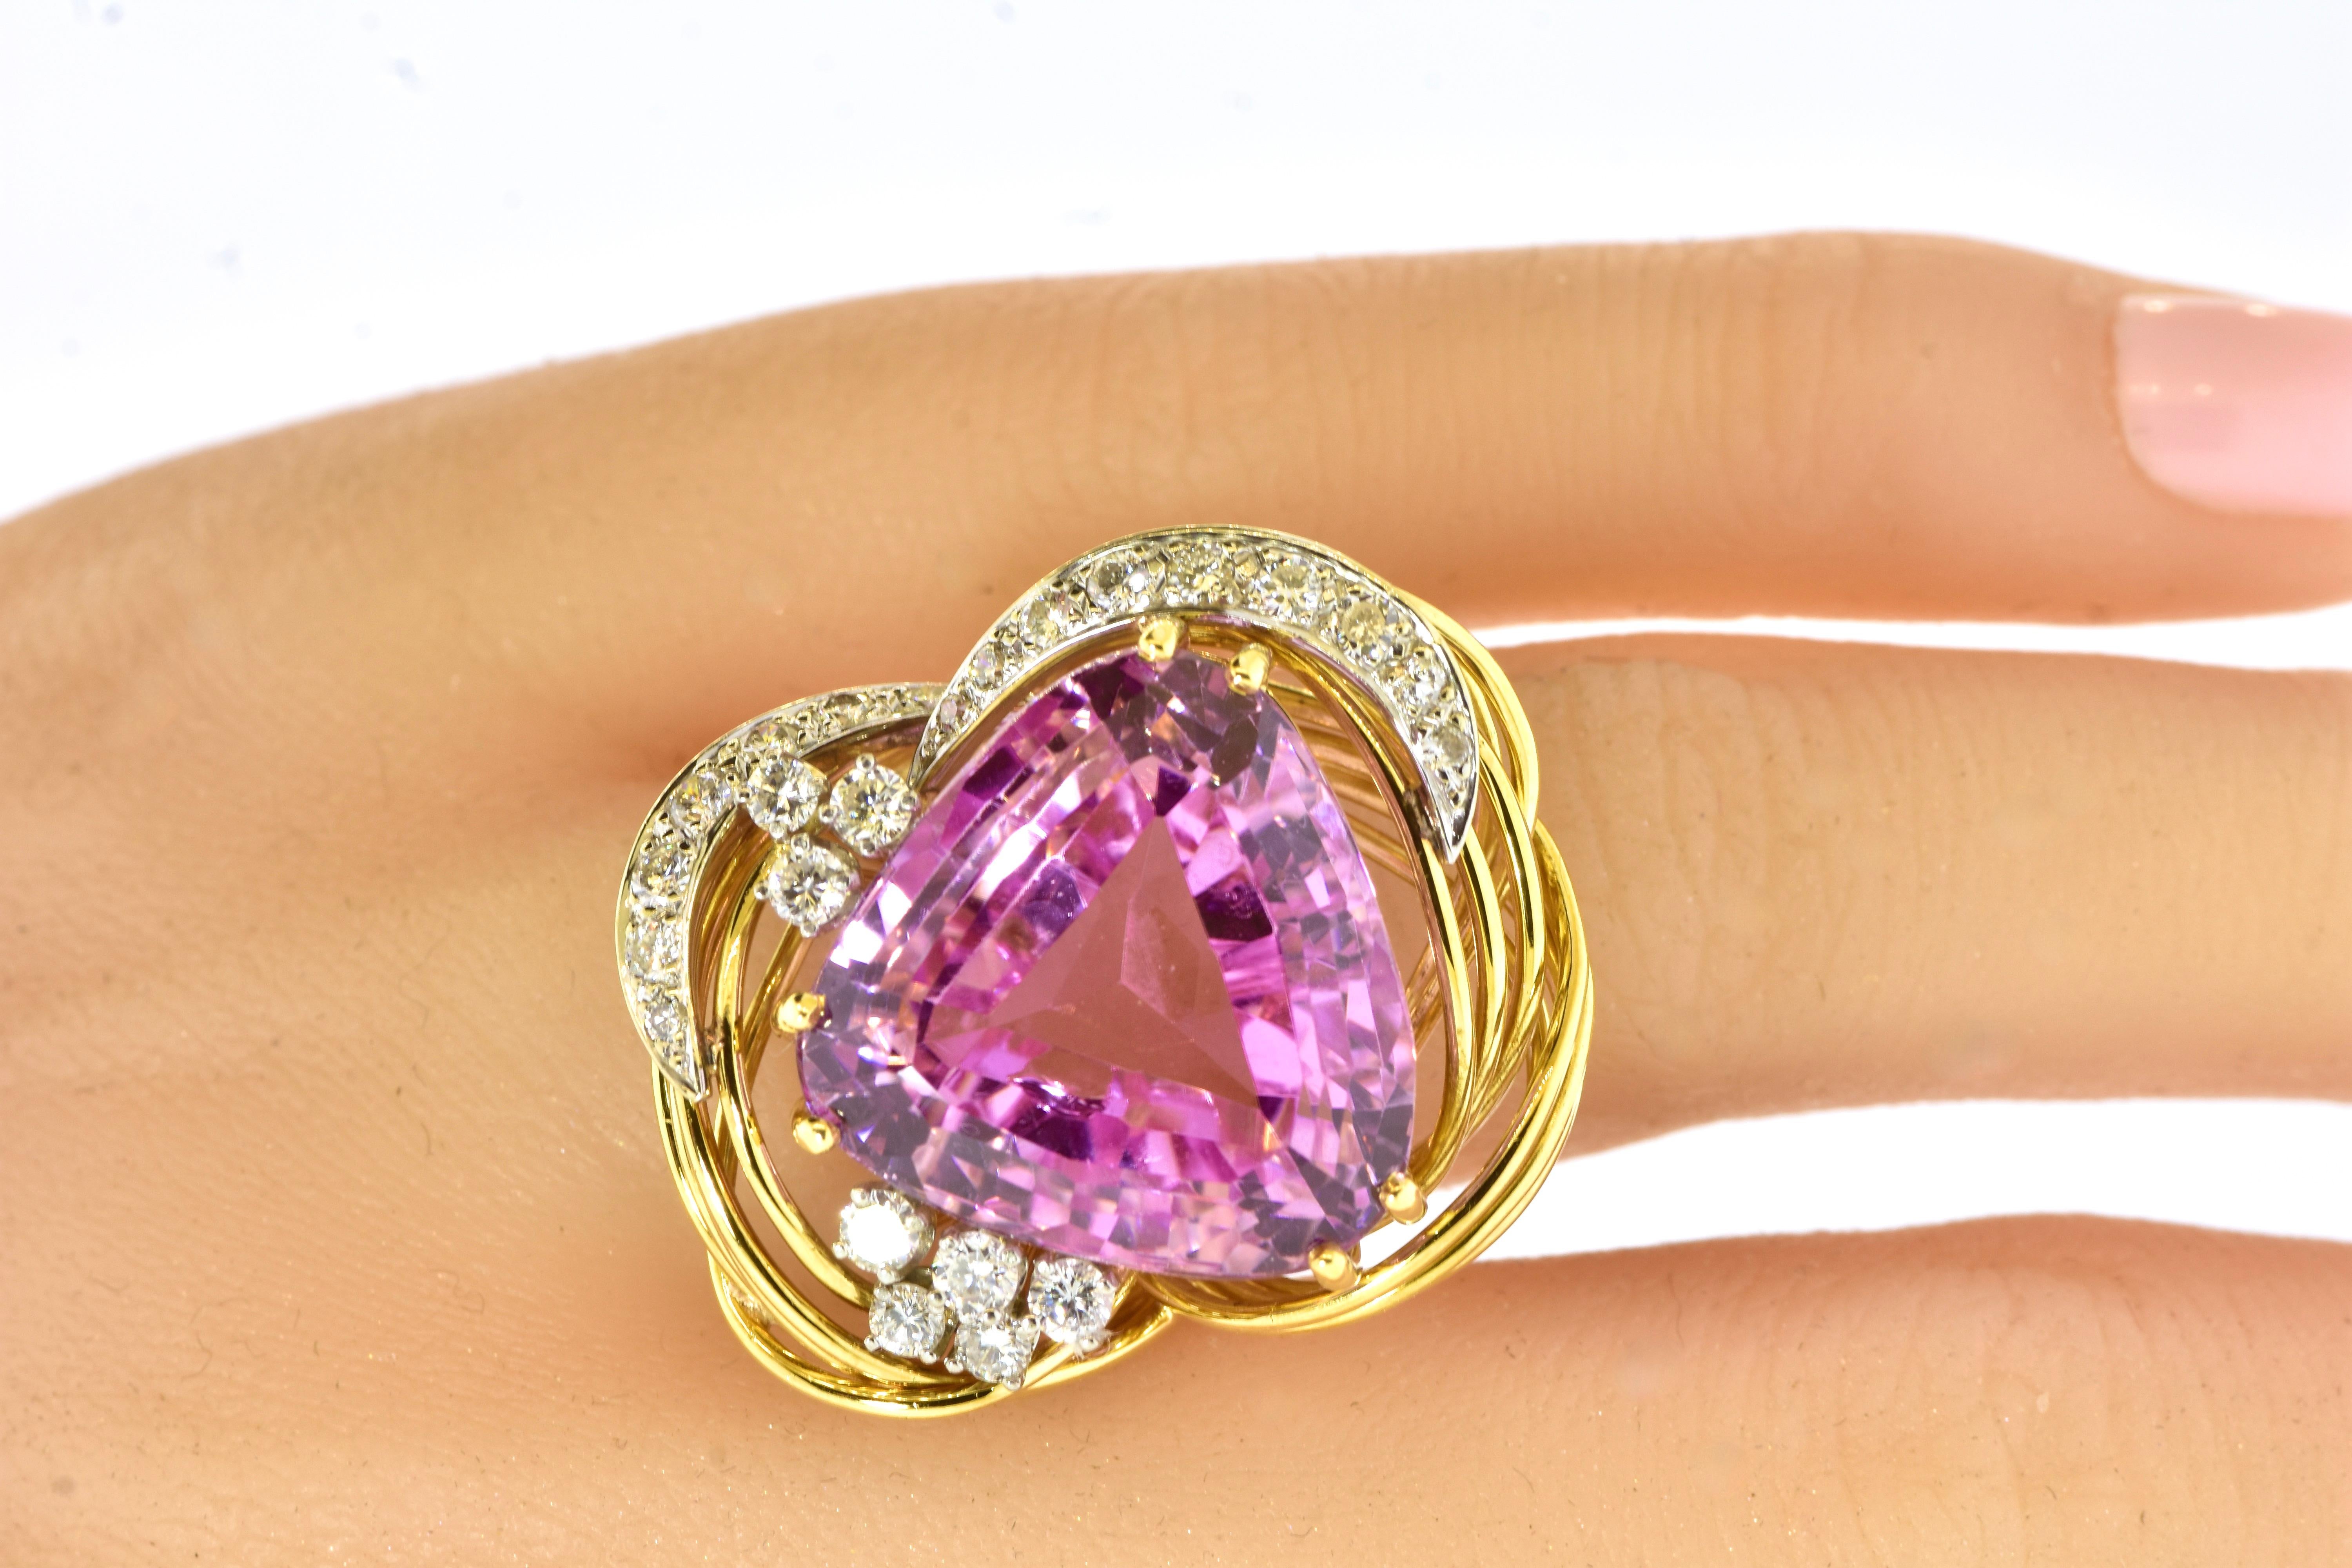 Pear Cut Fine  30 ct. Kunzite, Diamond and 18K yellow Gold Large Vintage Ring, c. 1960. For Sale